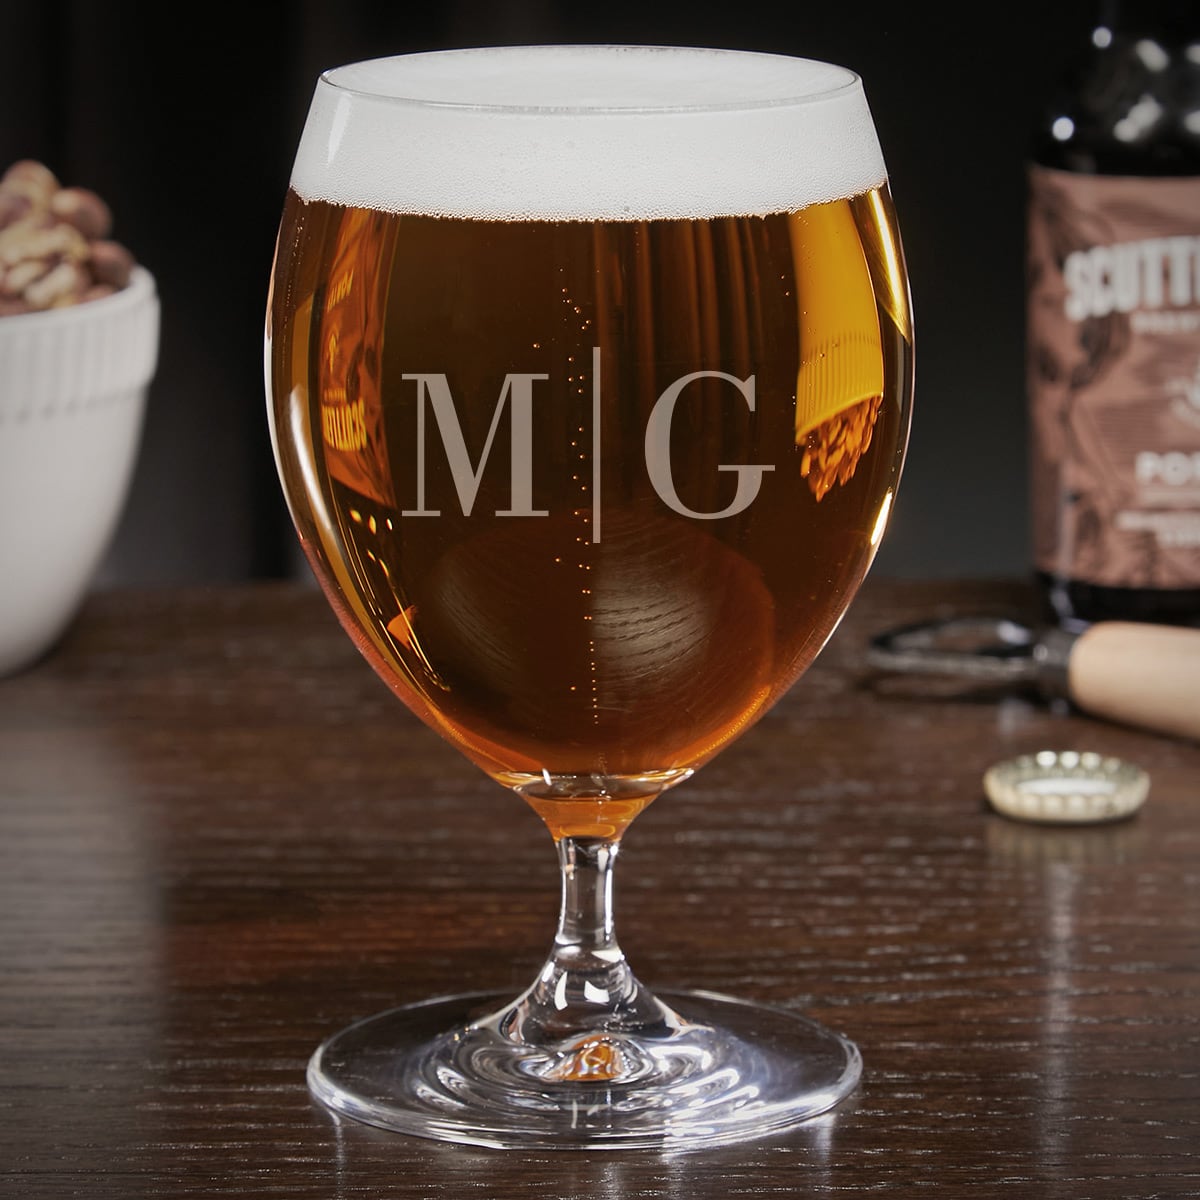 Ultimate Personalized Gifts for Beer Lovers - 8pc Boxed